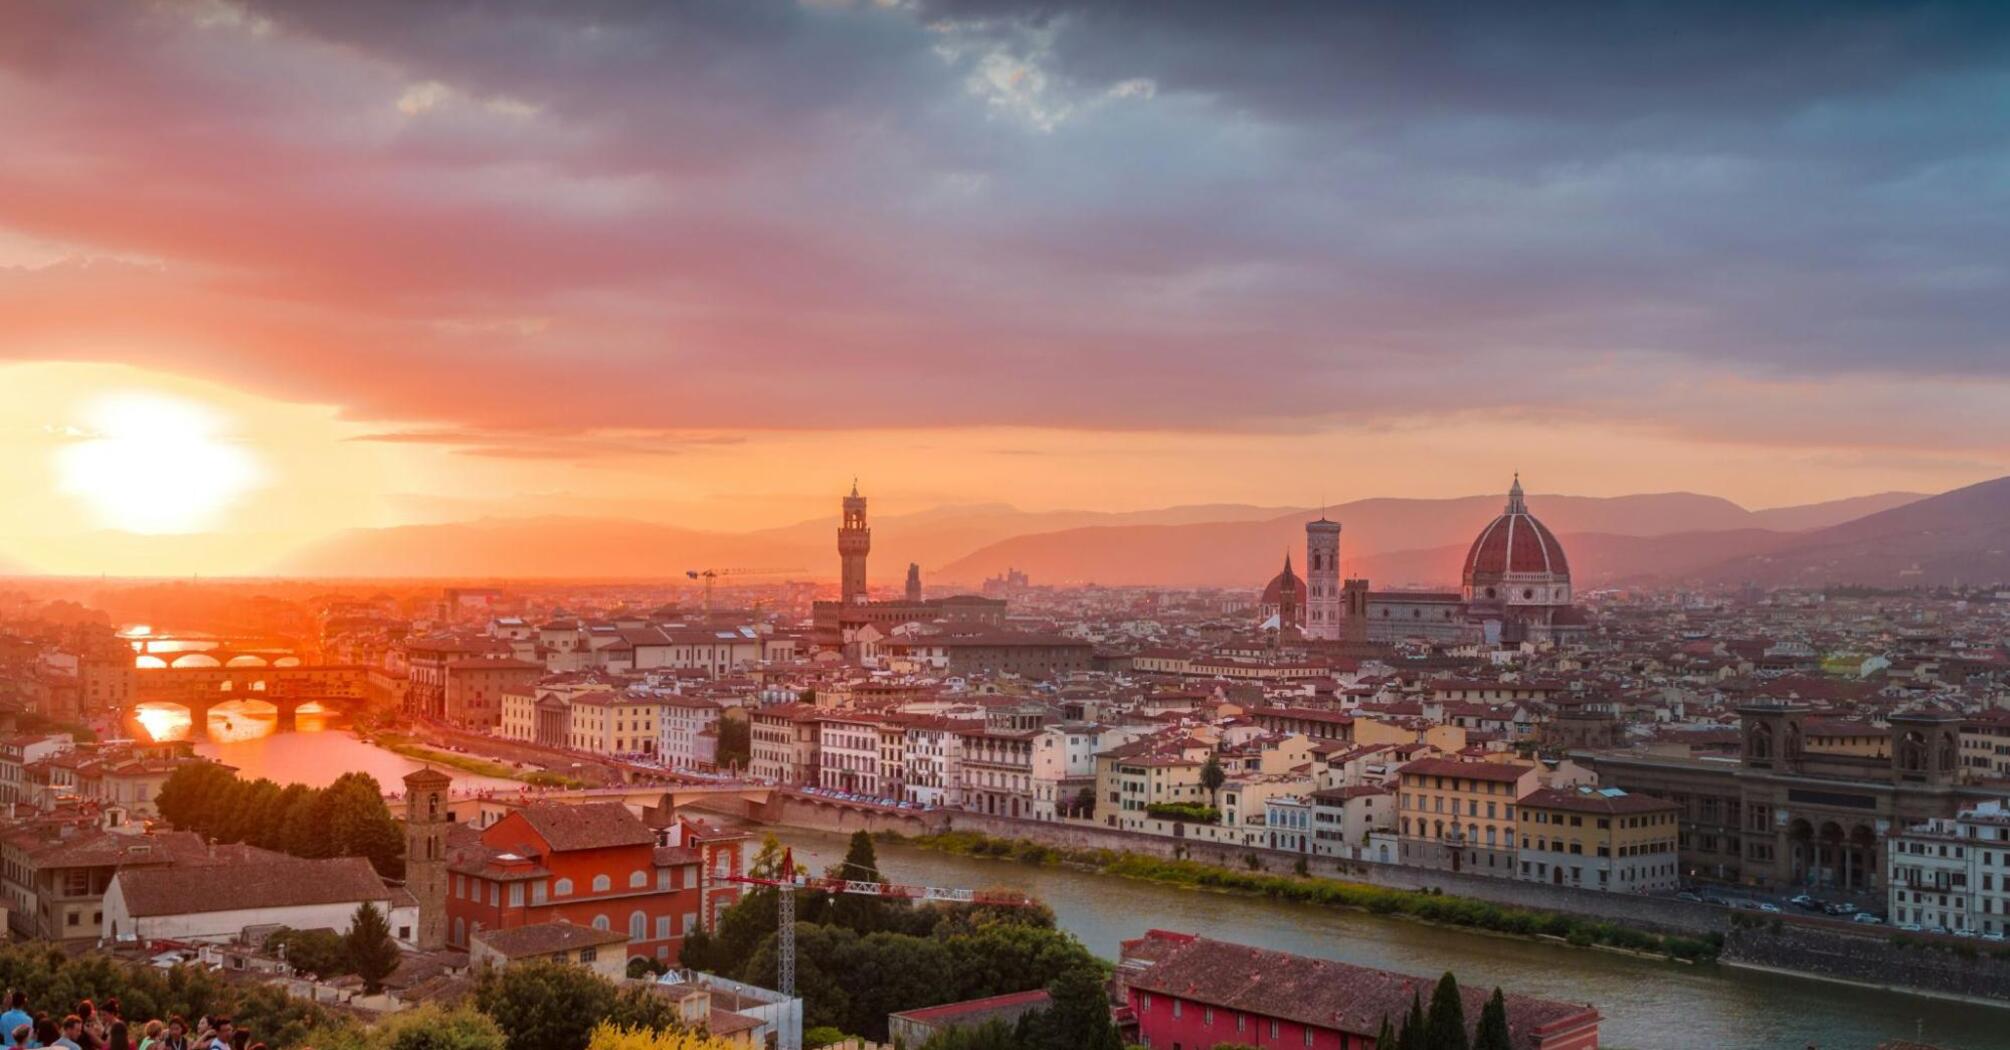 Dusk in Florence, Italy